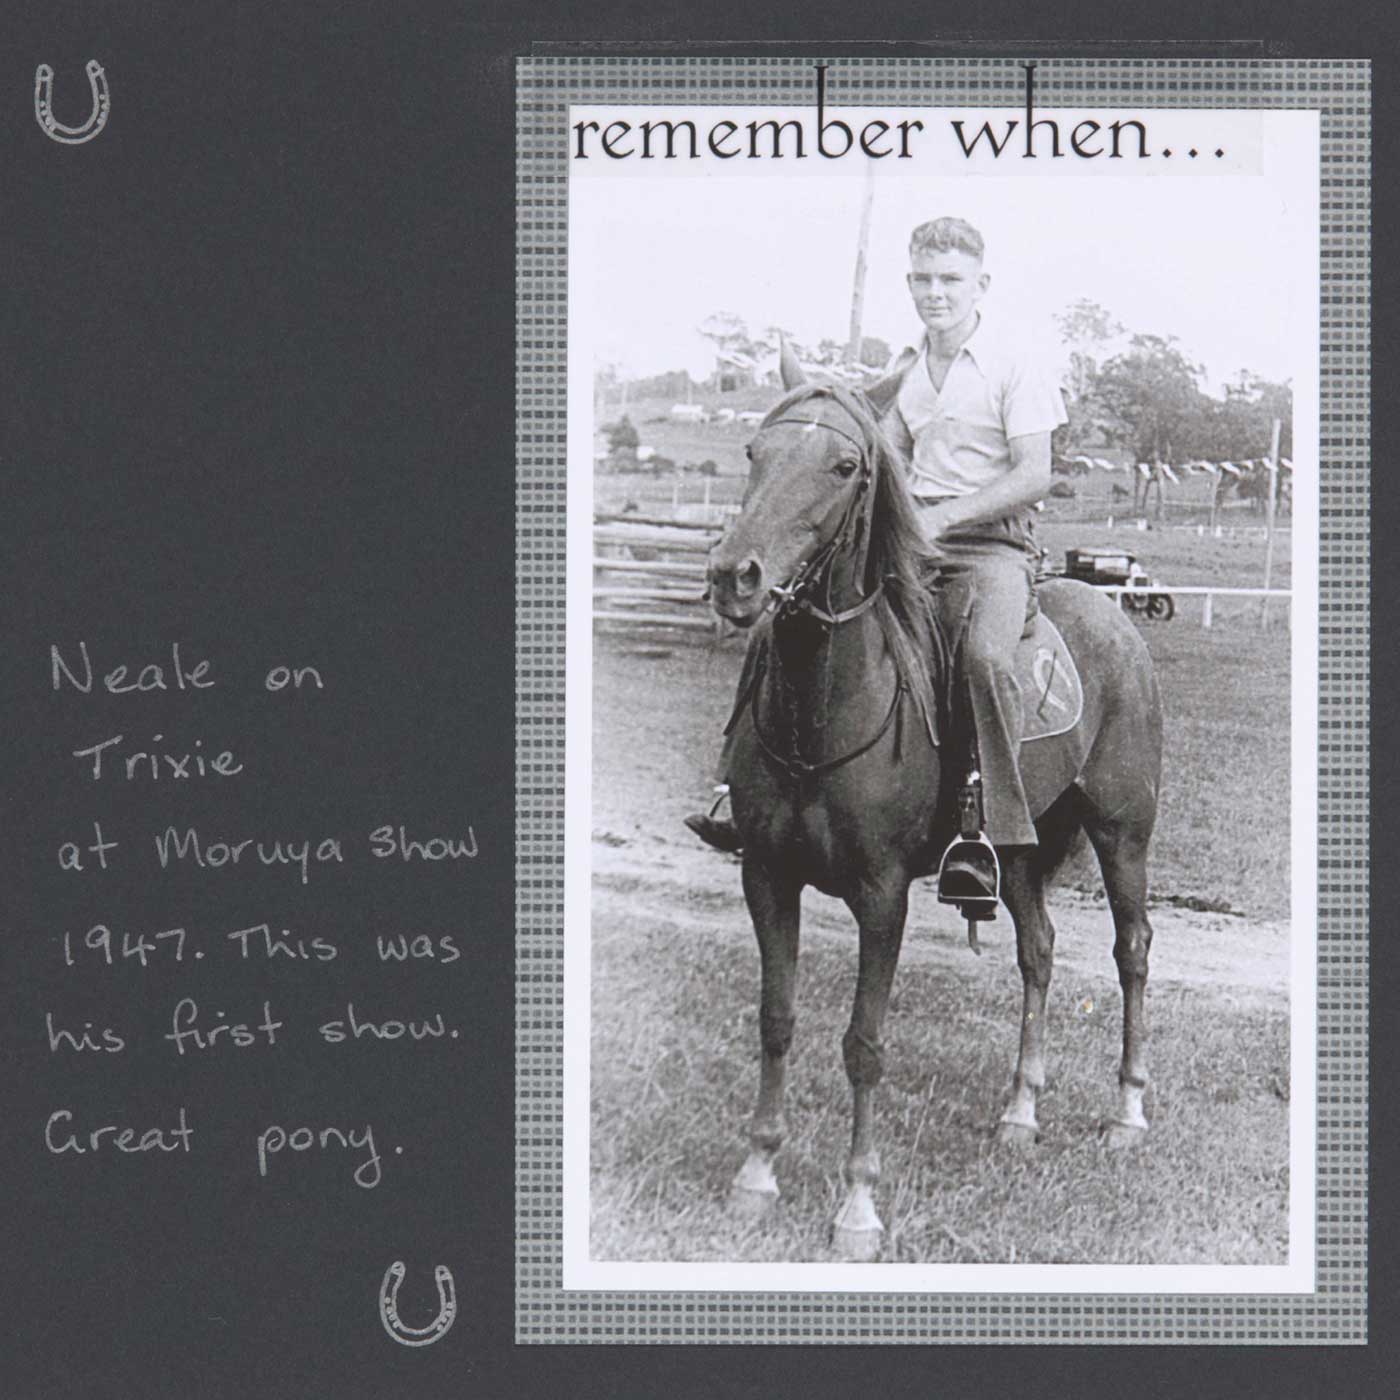 Neale, 17 years, on Trixie at the Moruya Show, 1947 - click to view larger image